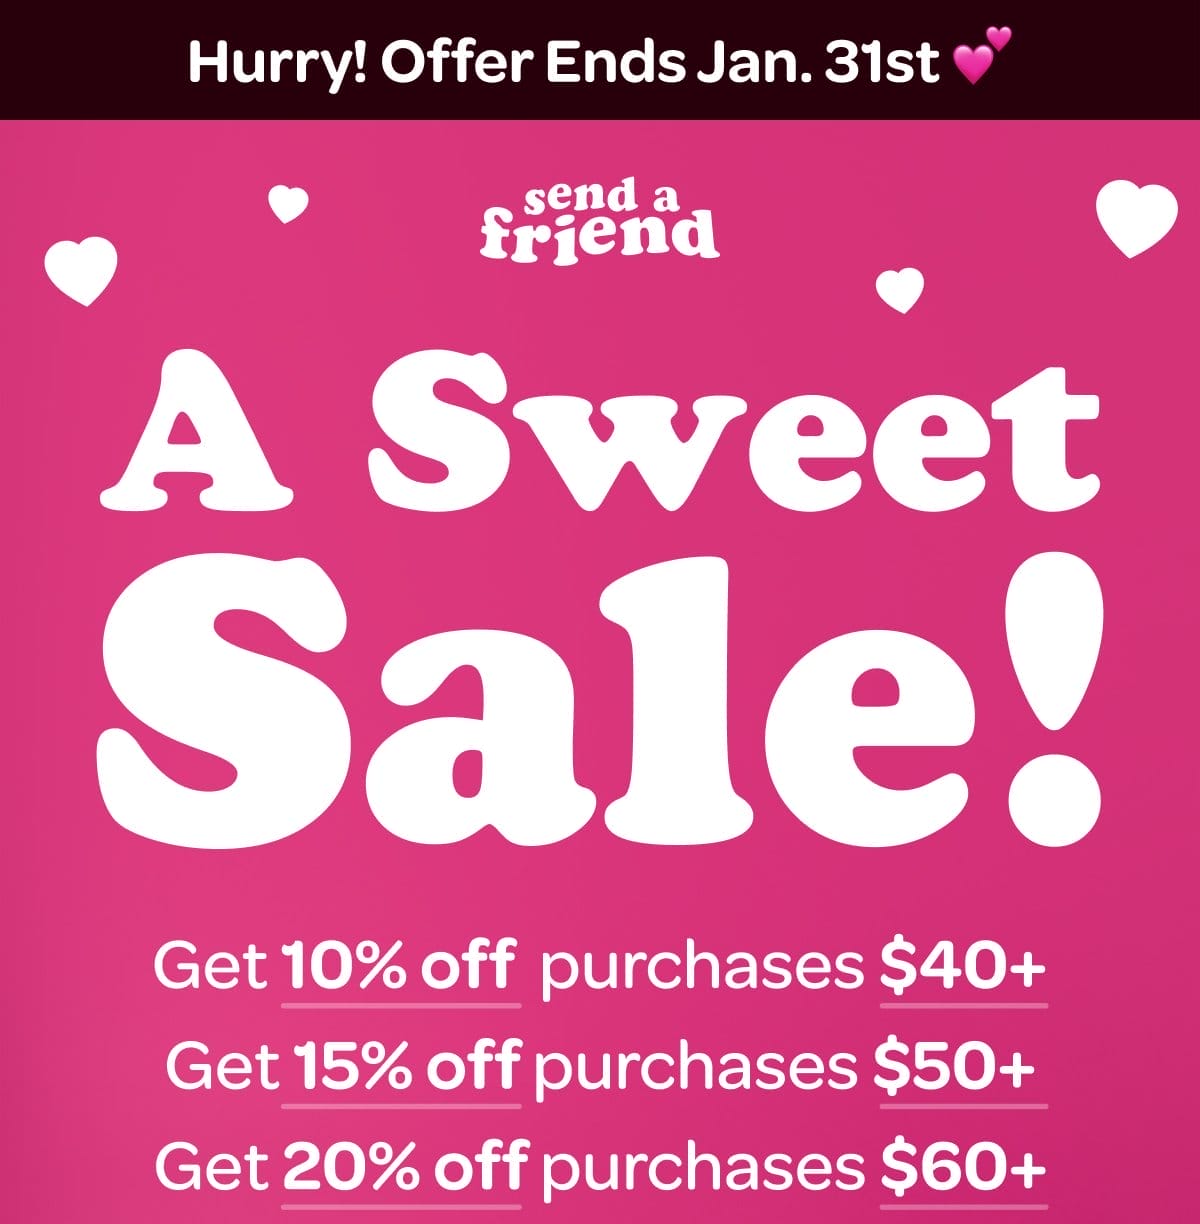 Hurry! Offer Ends Jan. 31st 💕 A Sweet Sale! Get 10% off purchases \\$40+. Get 15% off purchases \\$50+. Get 20% off purchases \\$60+